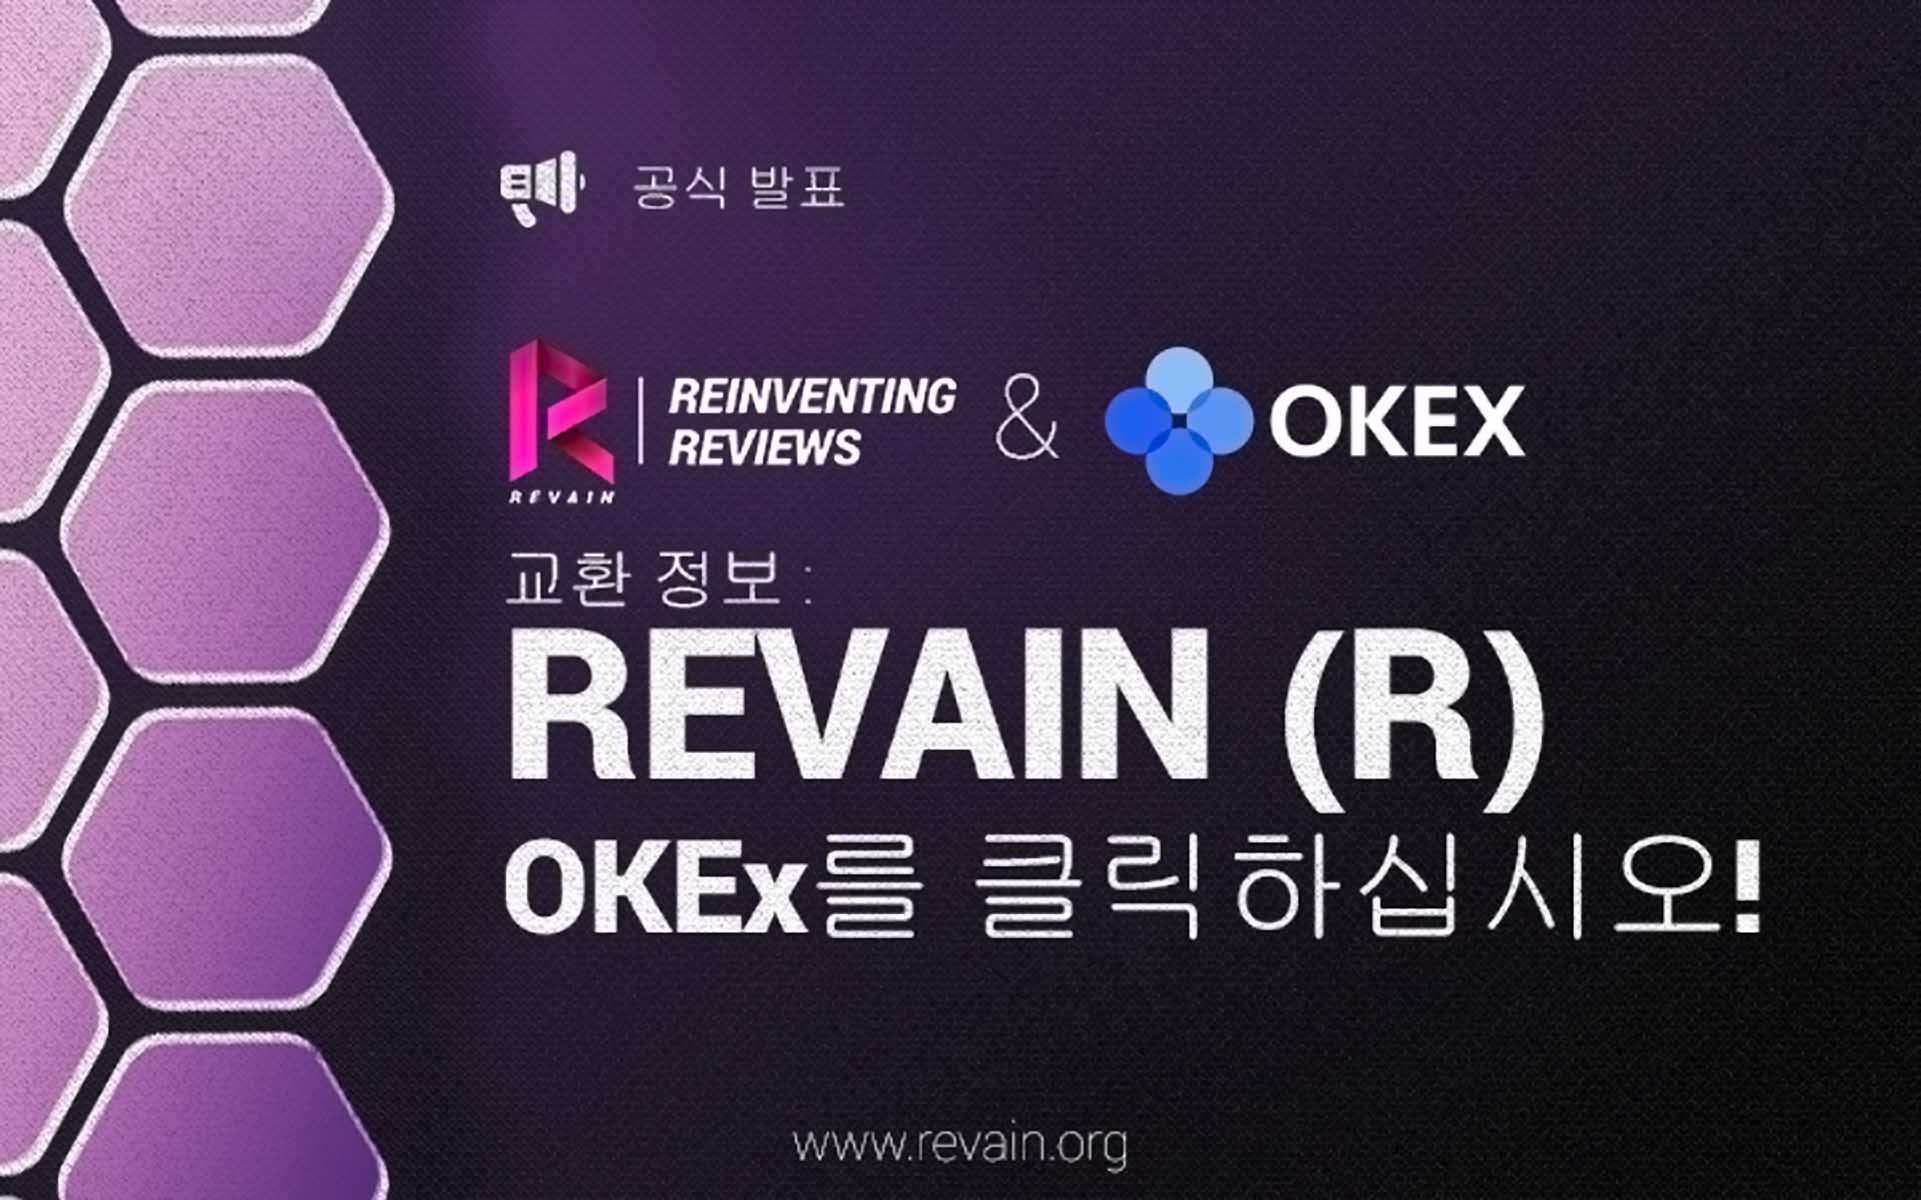 Revain Gets Listed on OKEx, One of the World’s Largest Cryptocurrency Exchanges